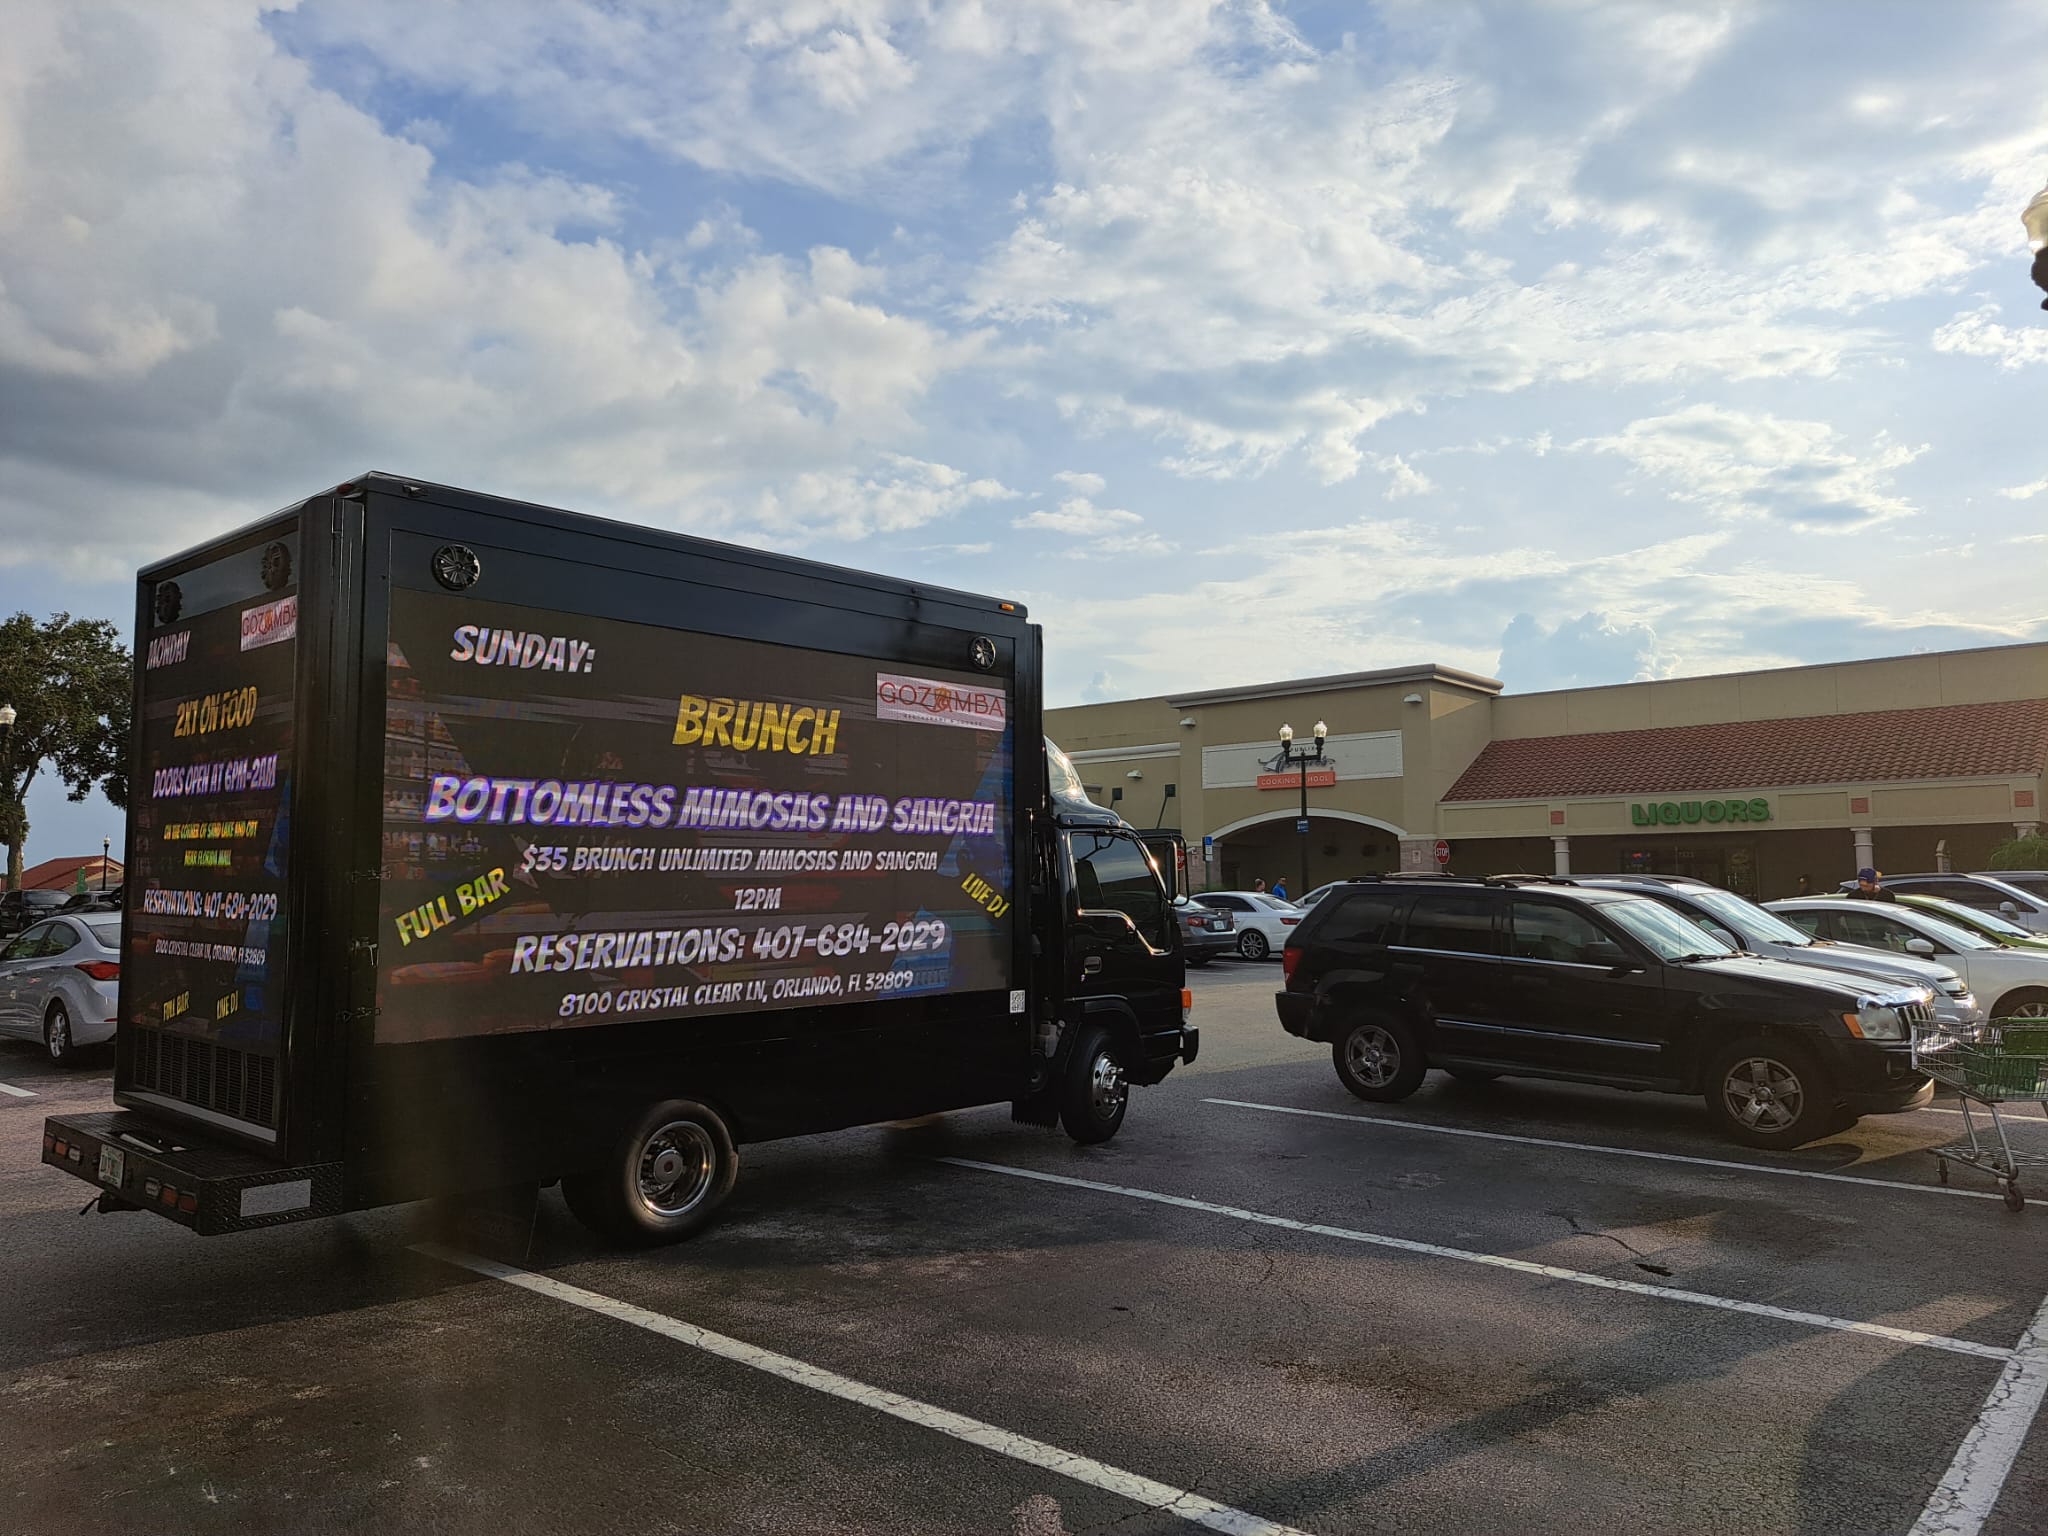 Orlando Locations to Showcase Your LED Truck Advertisements